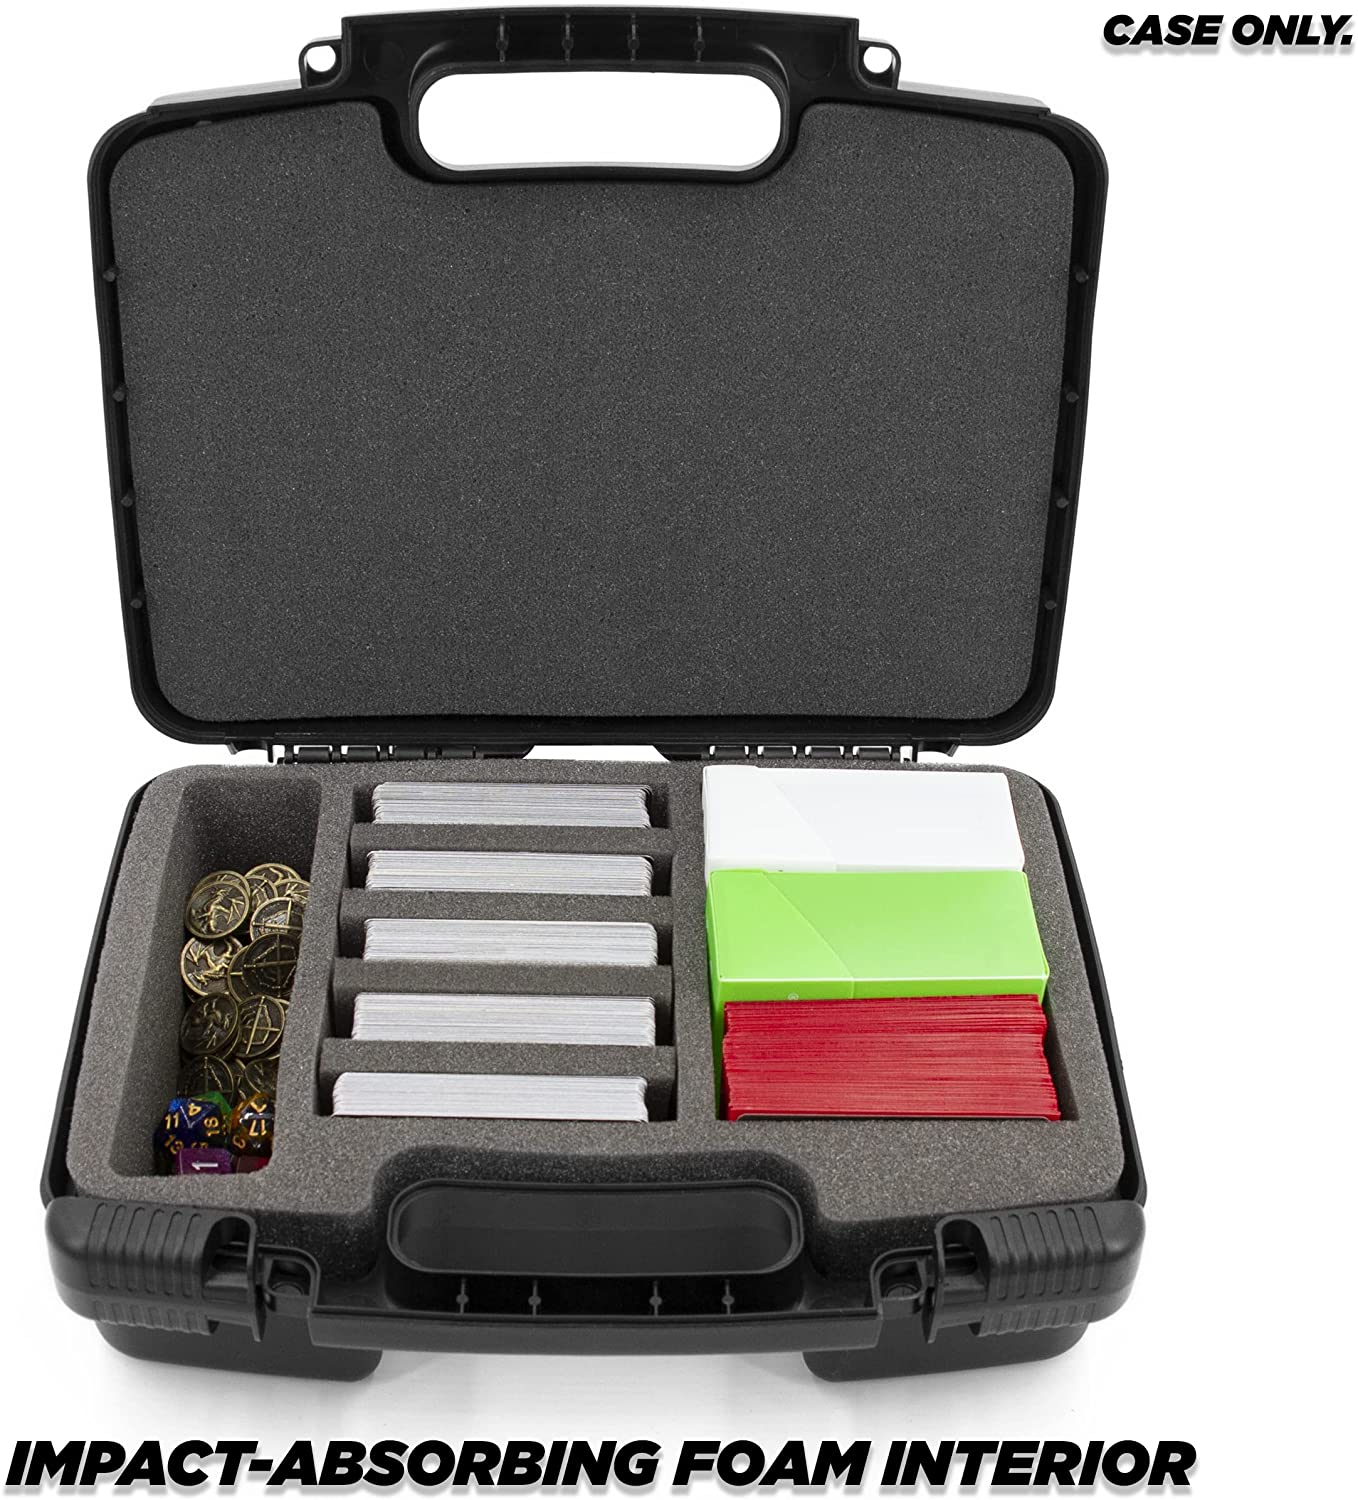 CASEMATIX Trading Card Case and Card Game Organizer for 960 Cards - Hard  Shell Card Case Holder for Trading Cards with 8 Dividers, Accessory Storage